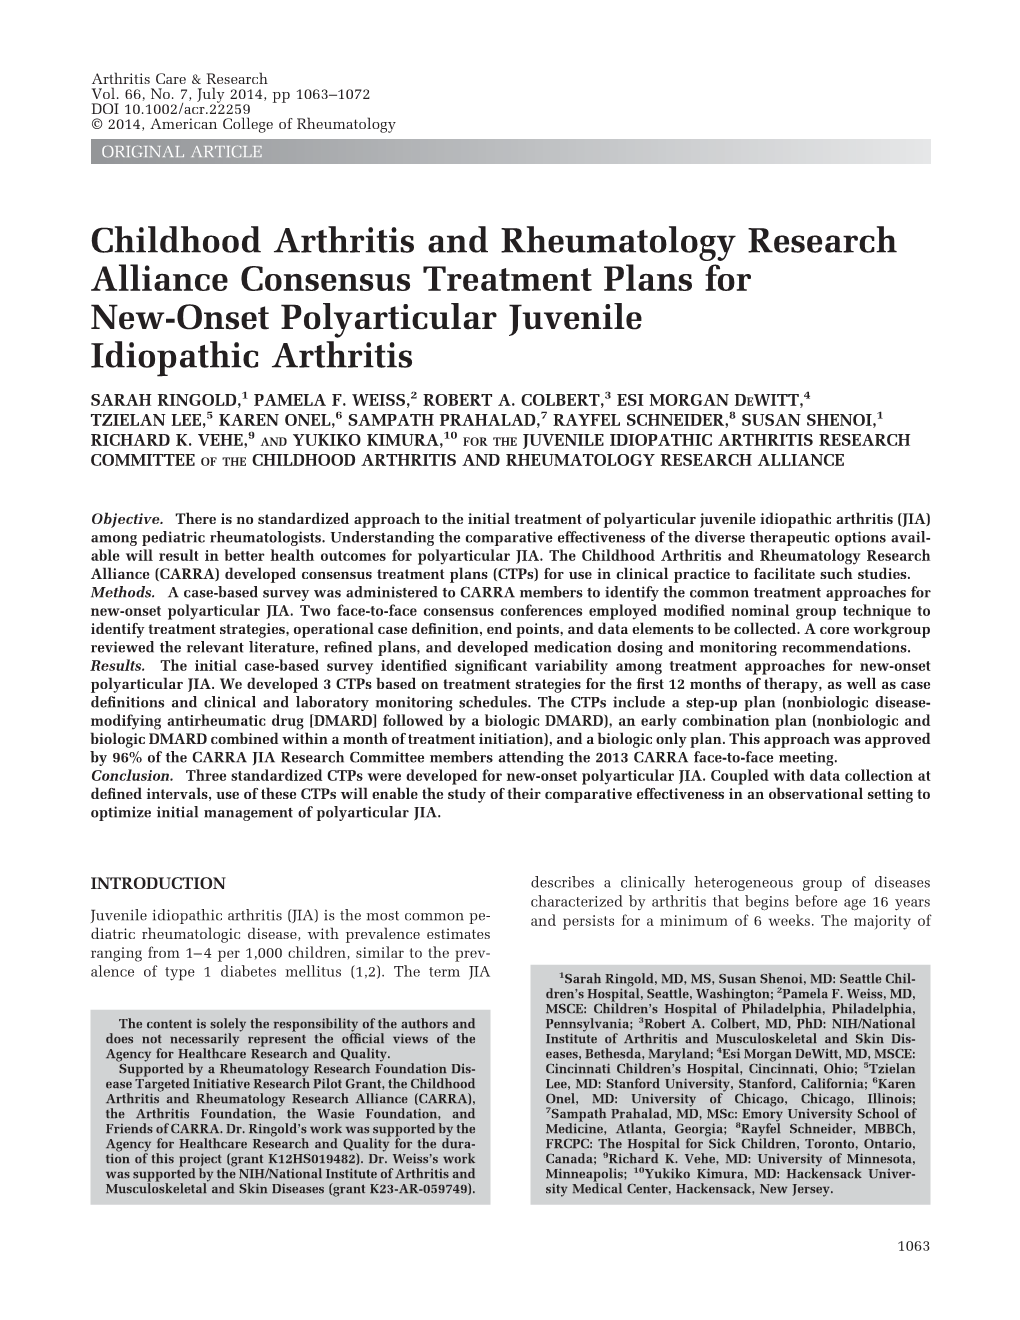 Childhood Arthritis and Rheumatology Research Alliance Consensus Treatment Plans for New‐Onset Polyarticular Juvenile Idiopath